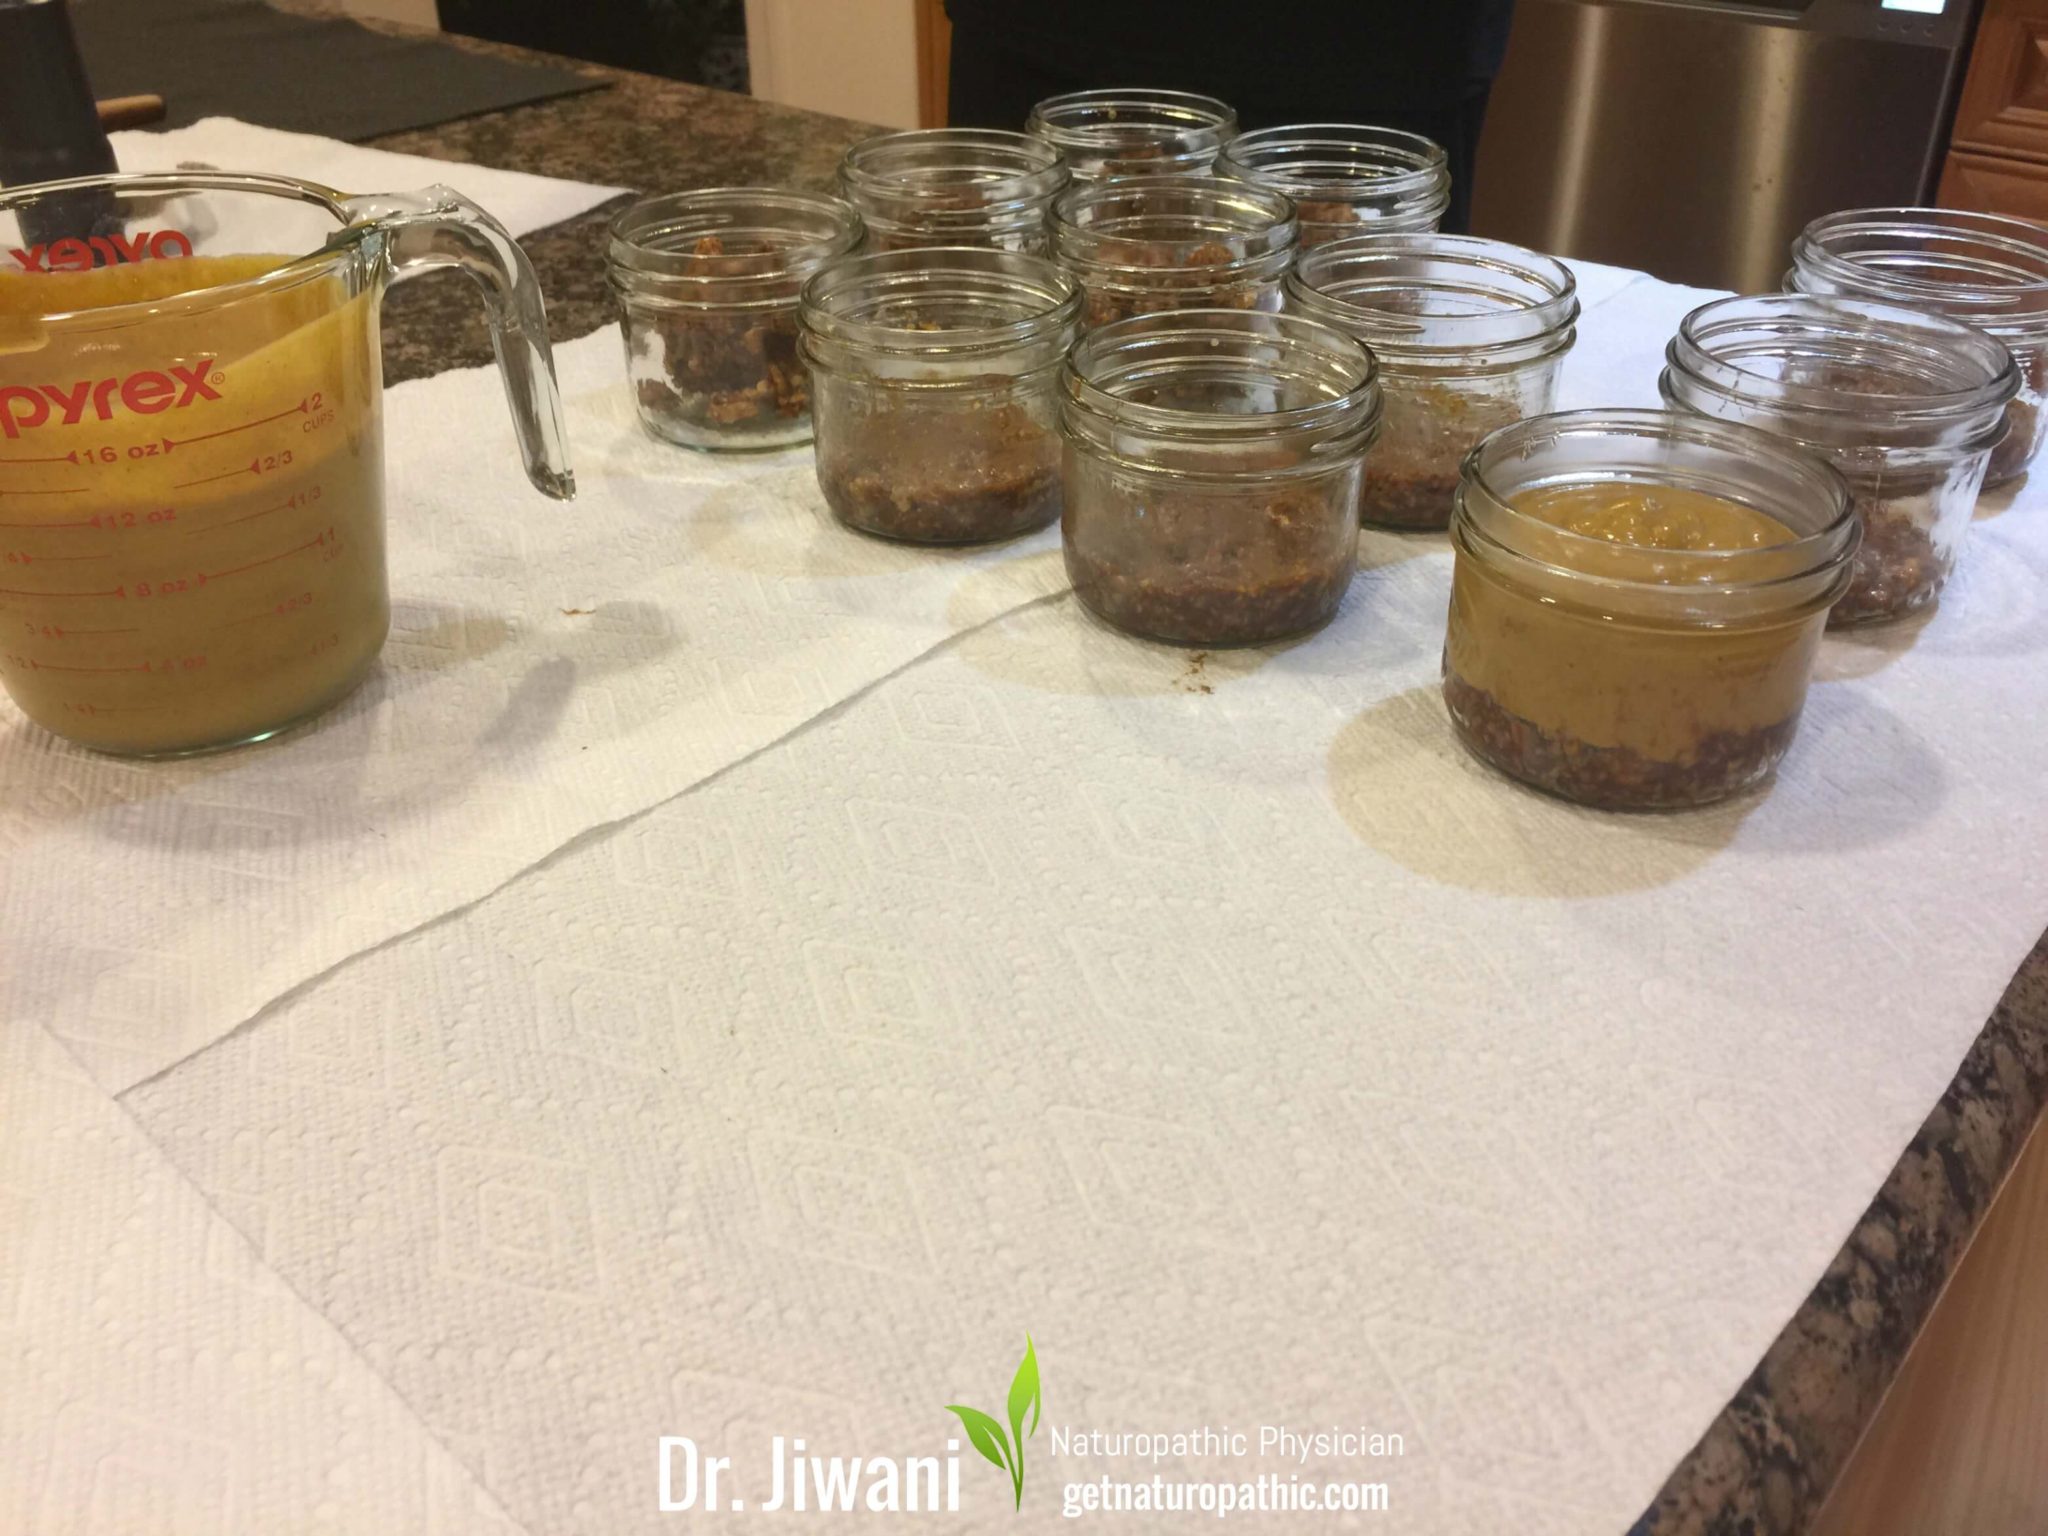 Dr. Jiwani's Pumpkin Pie Filling is Flavourful, Low Carb, Gluten-Free, Egg-Free, Dairy-Free, Soy-Free, Corn-Free, Ideal For Paleo, Keto, Vegan & Allergy-Free Diets | Dr. Jiwani's Naturopathic Nuggets Blog